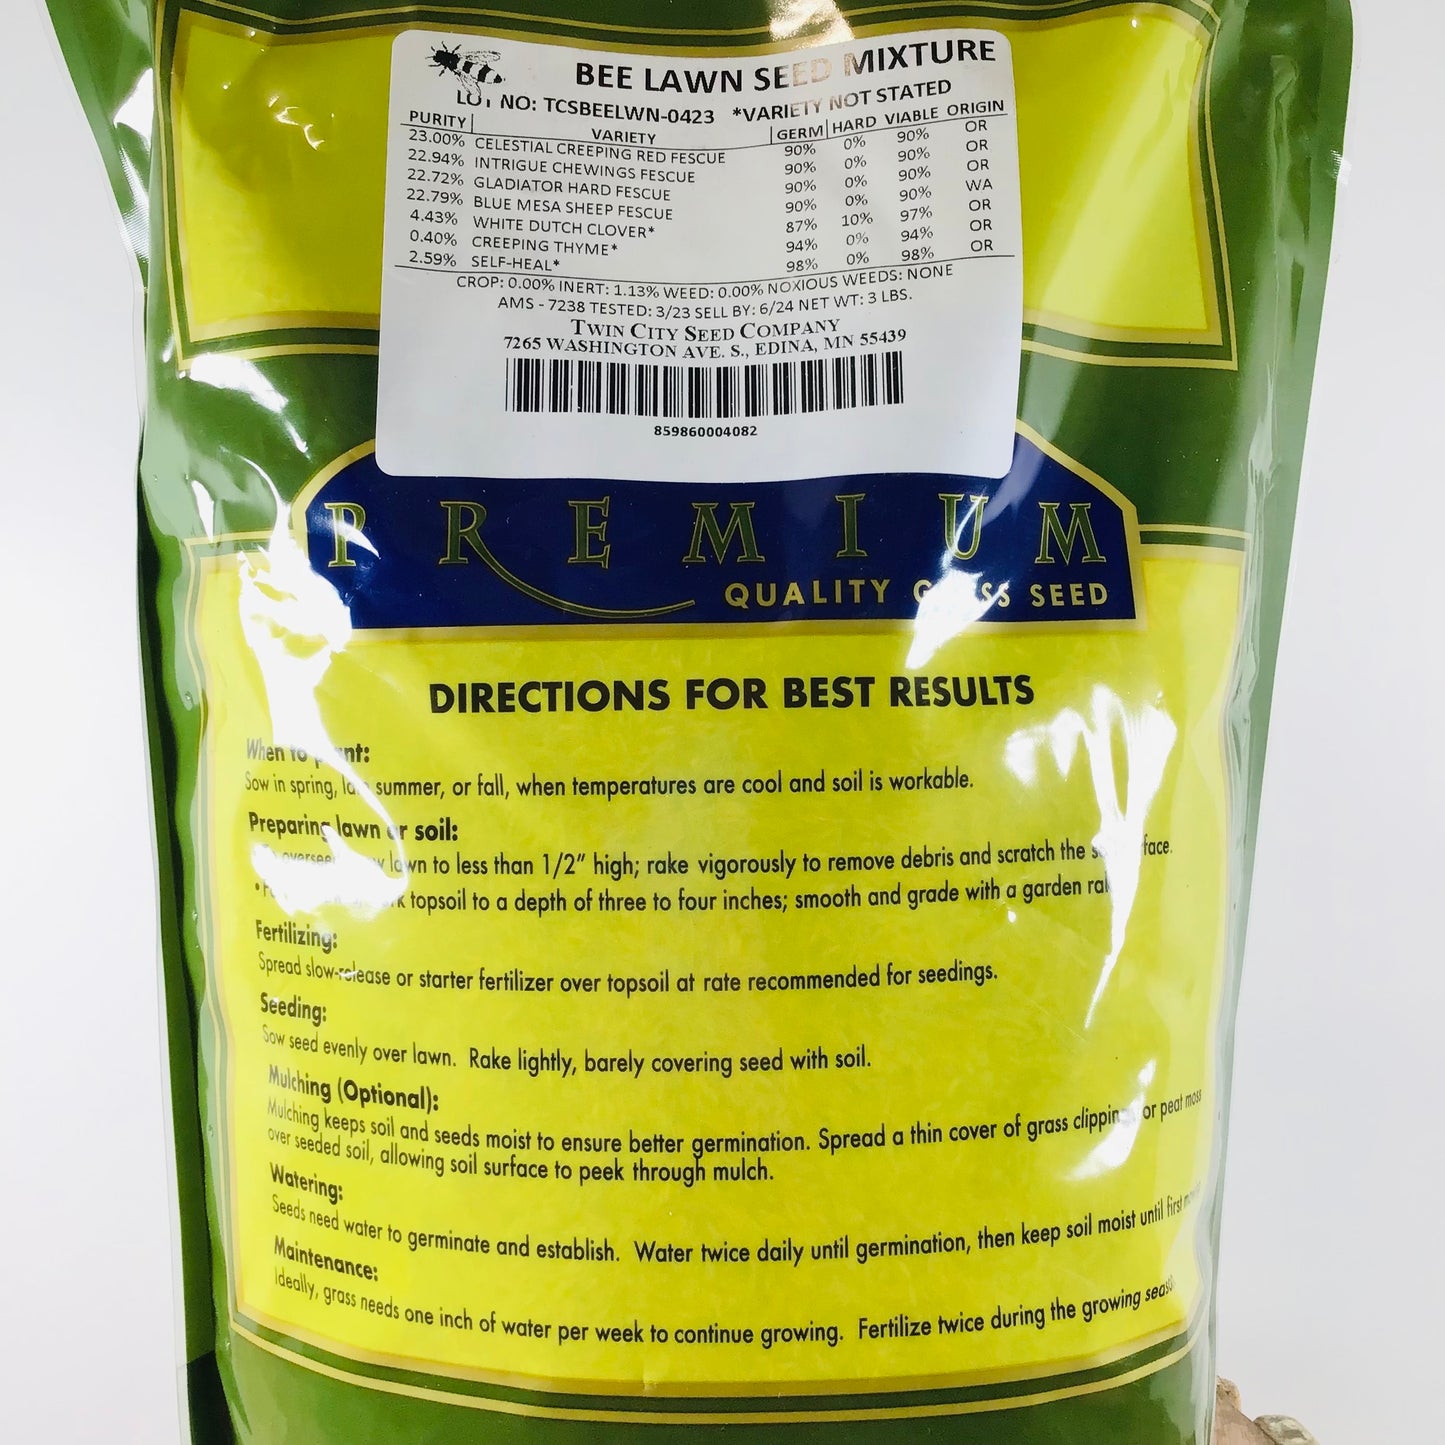 Bee Lawn Mix - Original (includes grass seed) - 3lb